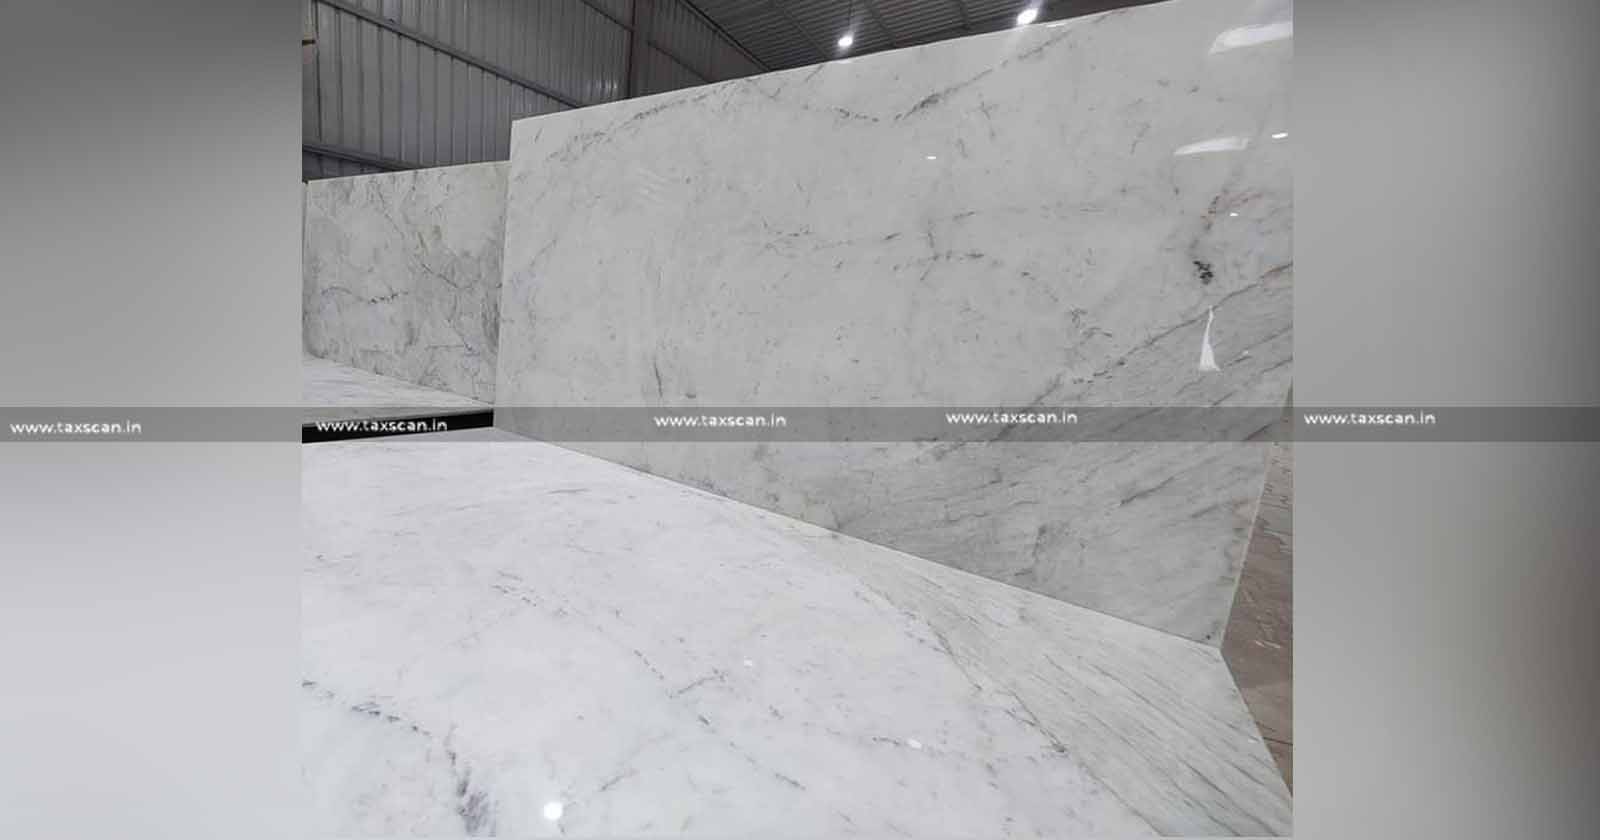 Cutting and filing Resin in Marble Slabs - Cutting - filing Resin in Marble Slabs - Marble Slabs - amount to manufacture - manufacture - Benefit under Exemption Notification - CESTAT - taxscan